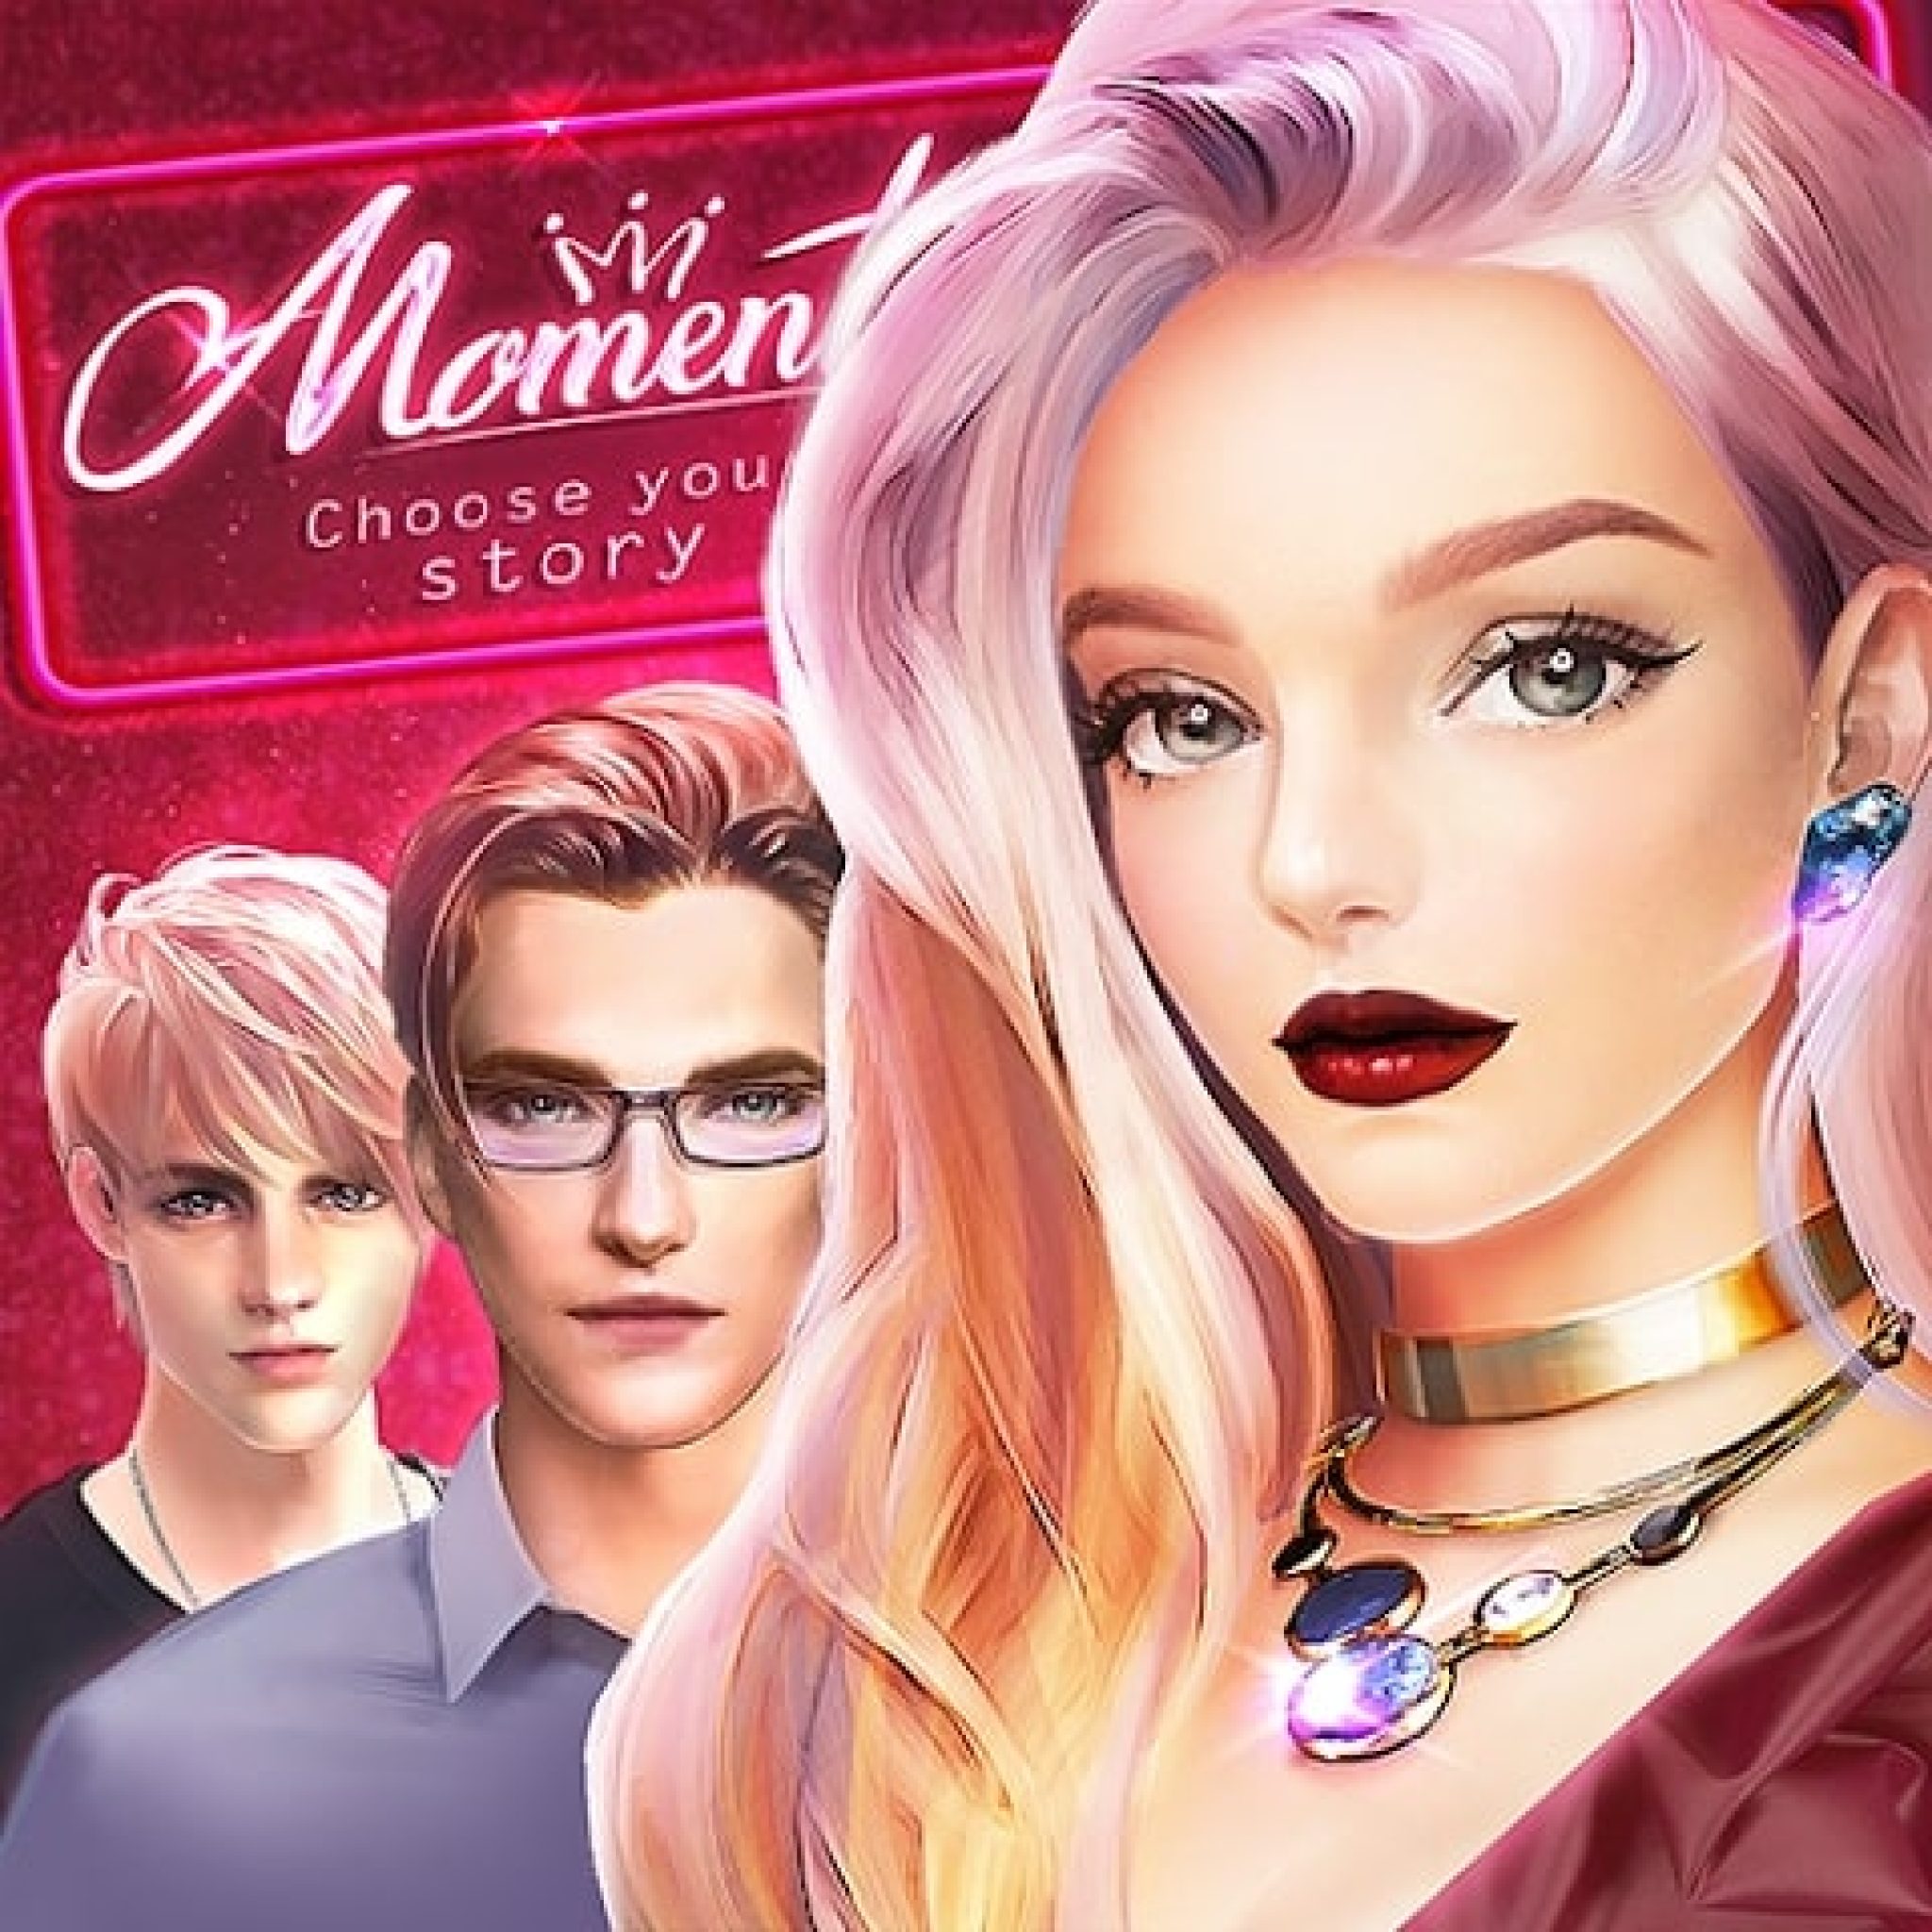 Your story мод. Vampire Love story игра. Choose your story история. Той осенью your story interactive. Персонажи игры moments choose your story.